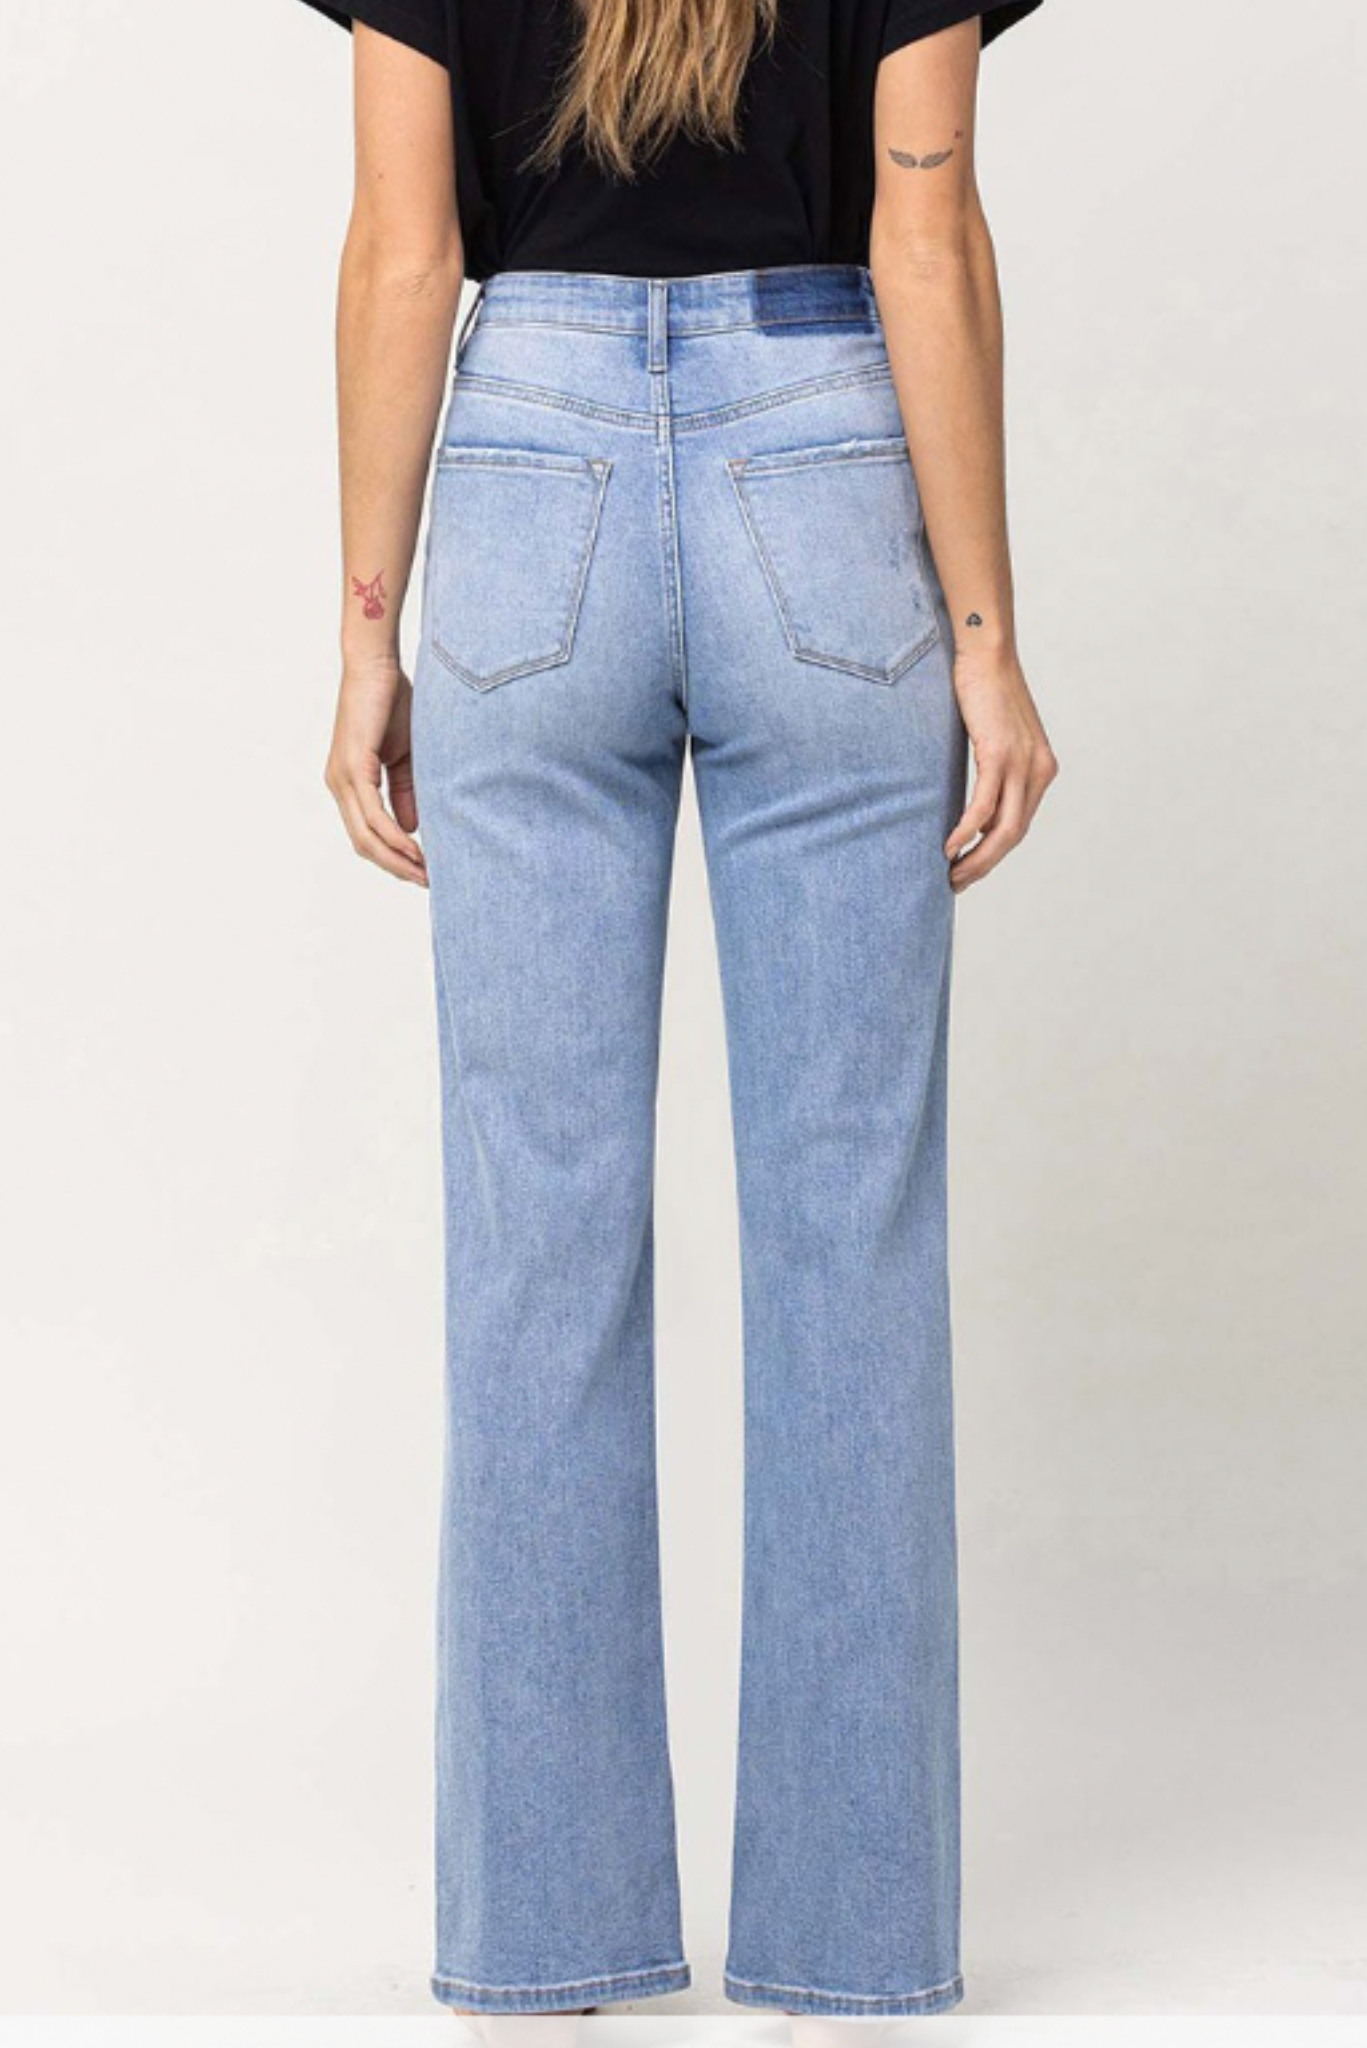 Load image into Gallery viewer, High Rise Light Wash Straight Flare Jeans, high rise denim, straight leg jeans, straight leg, nondistressed denim, jeans, Shop Style Your Senses By Mallory Fitzsimmons
